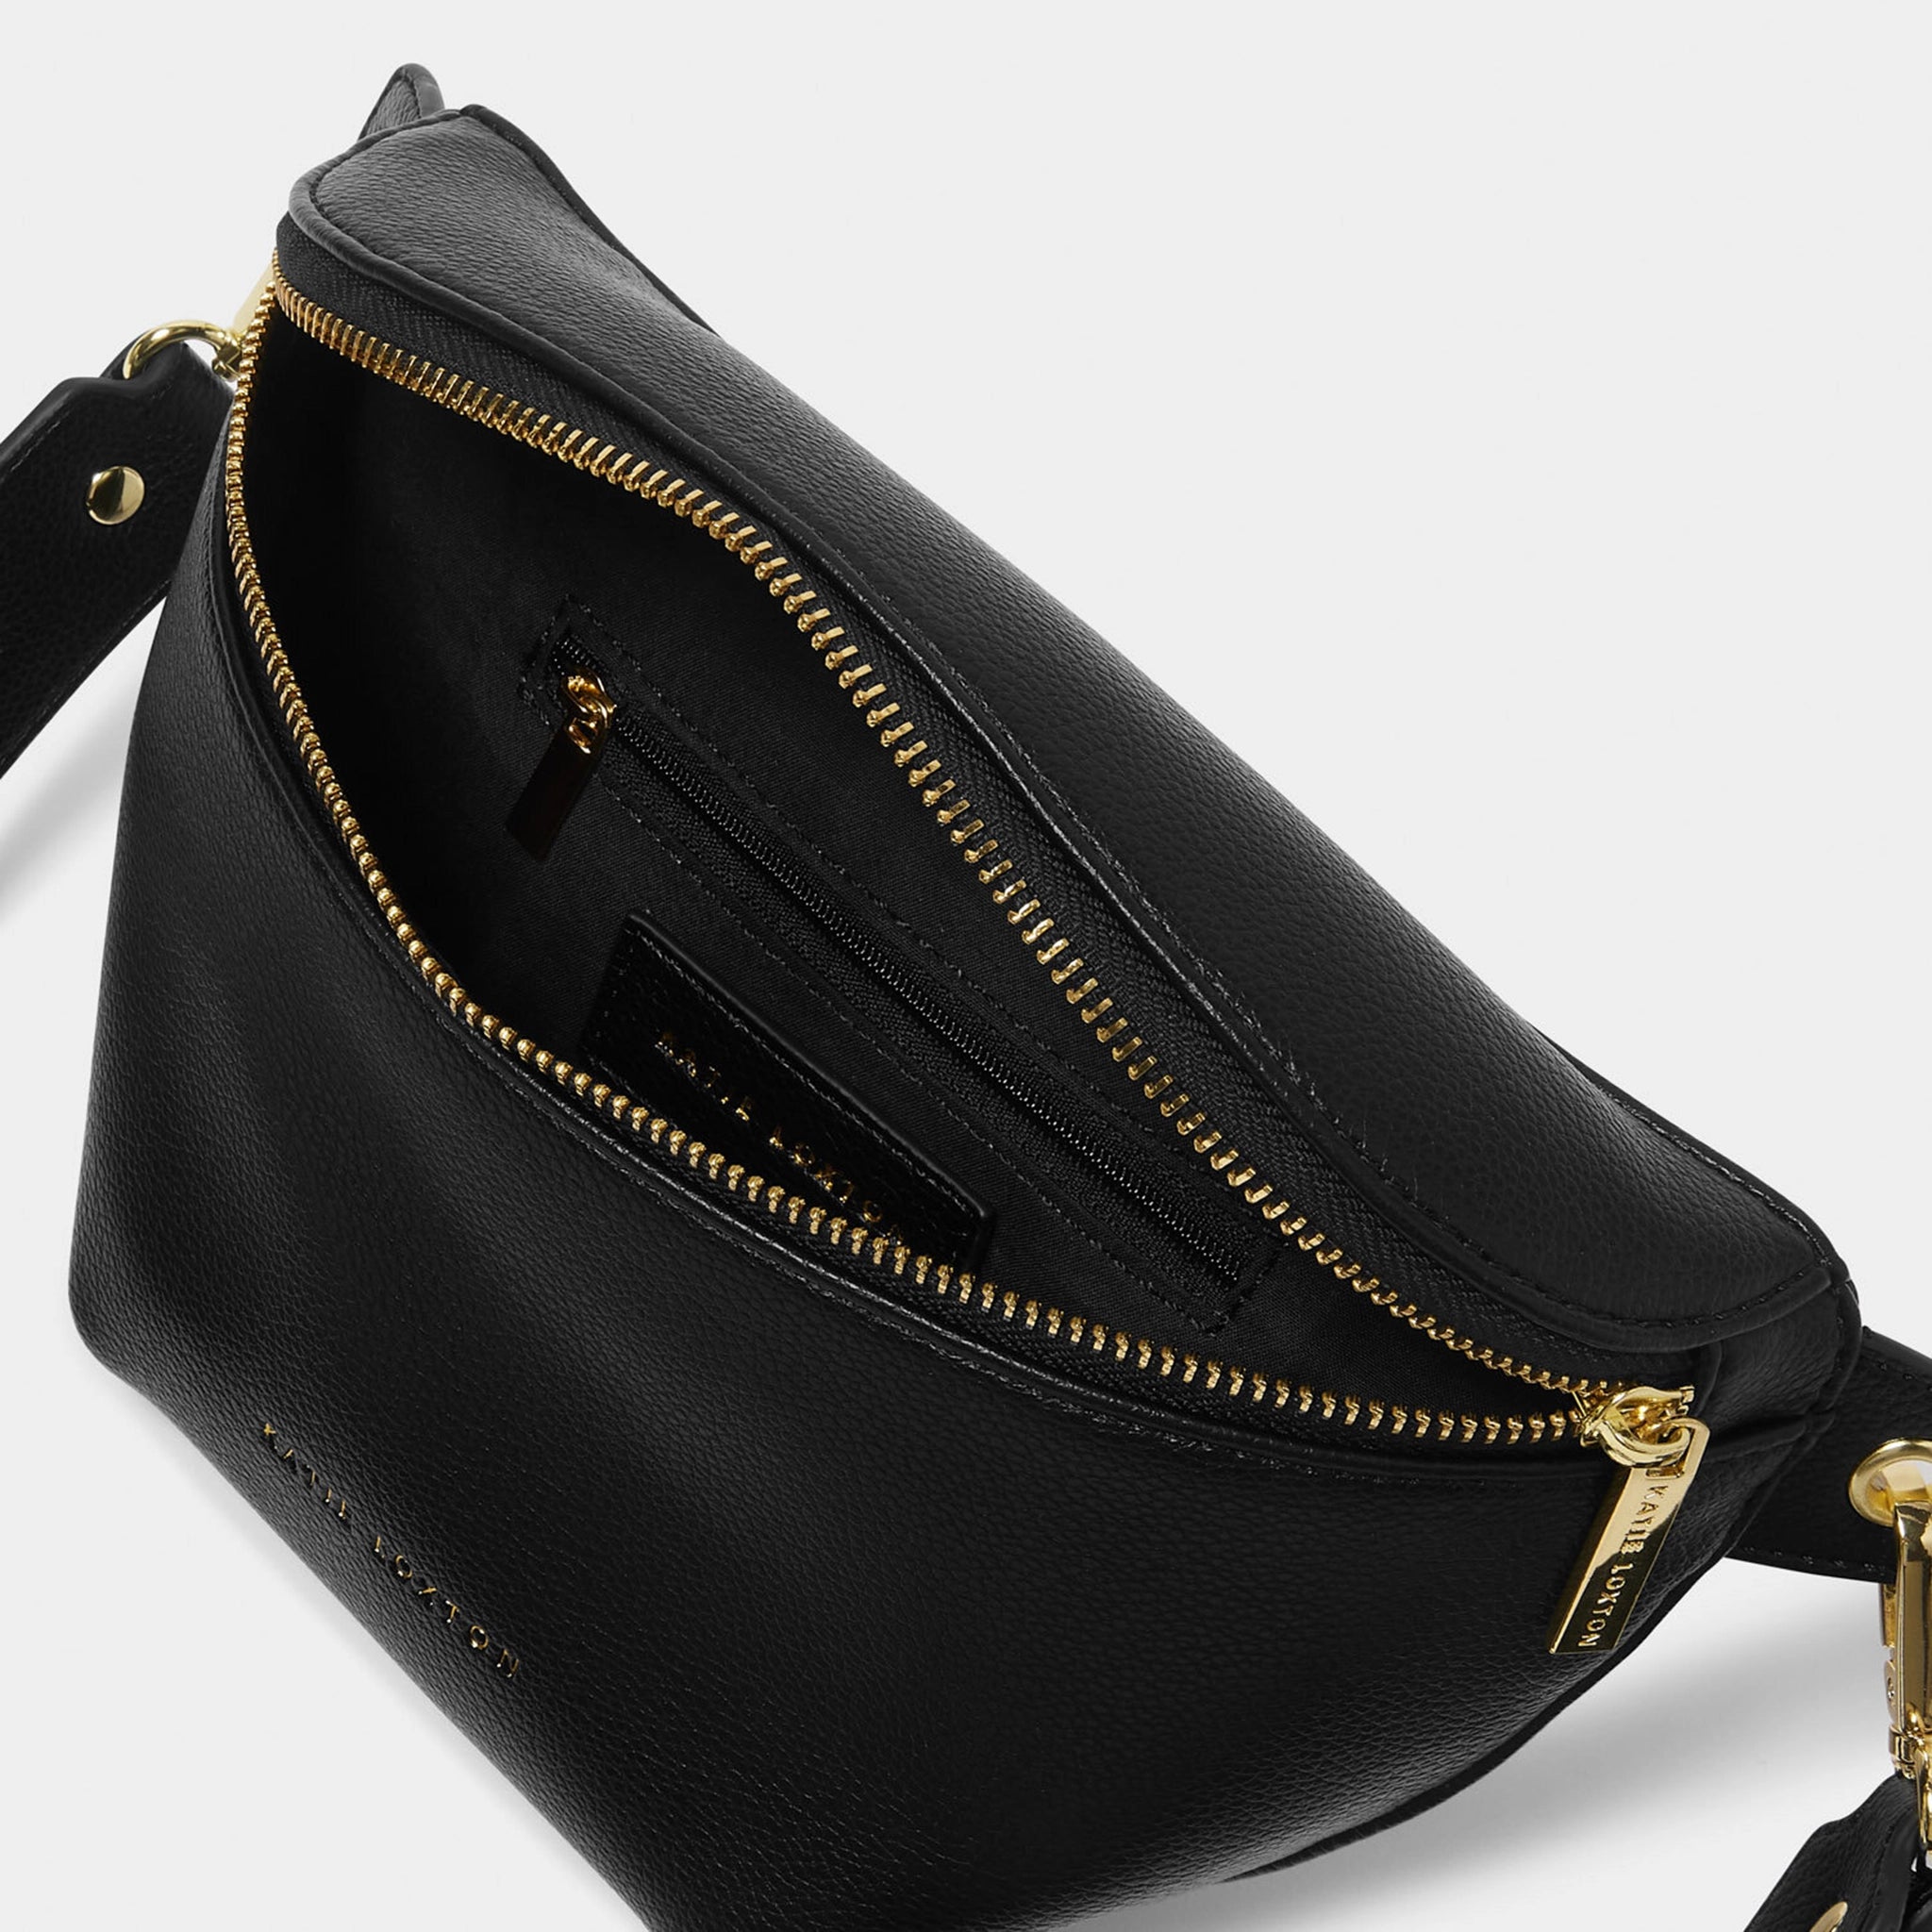 Open belt bag in faux leather and black with gold hardware